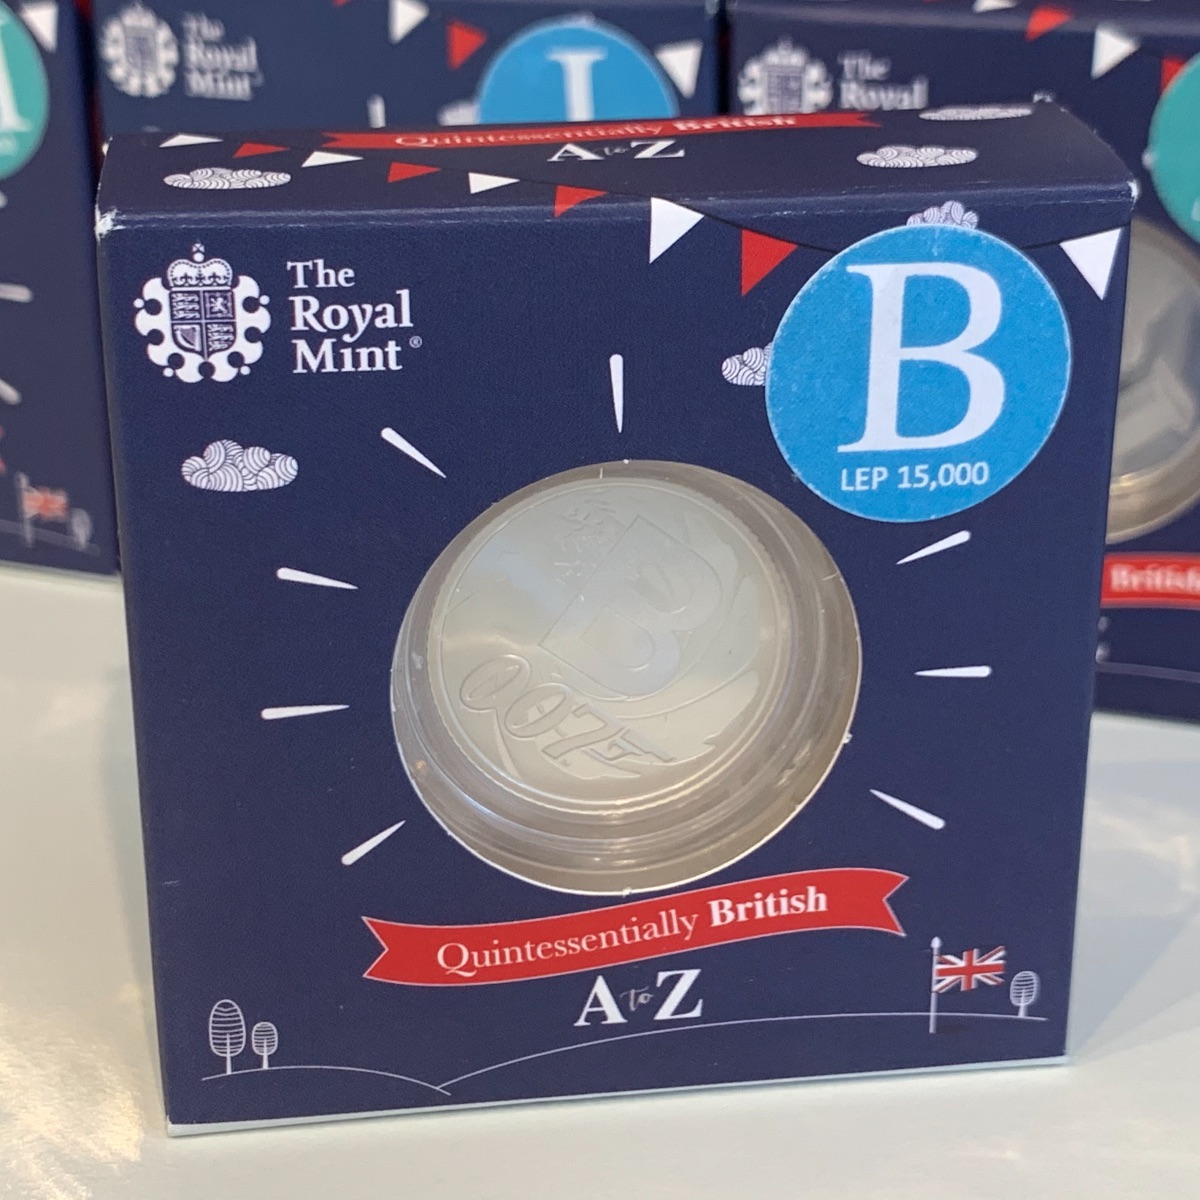 B James Bond 10p Silver Proof Coin Alphabet Letter Great British Hunt A-Z 2018 UK18BSP 5026177405931 (Brand New & Sealed)